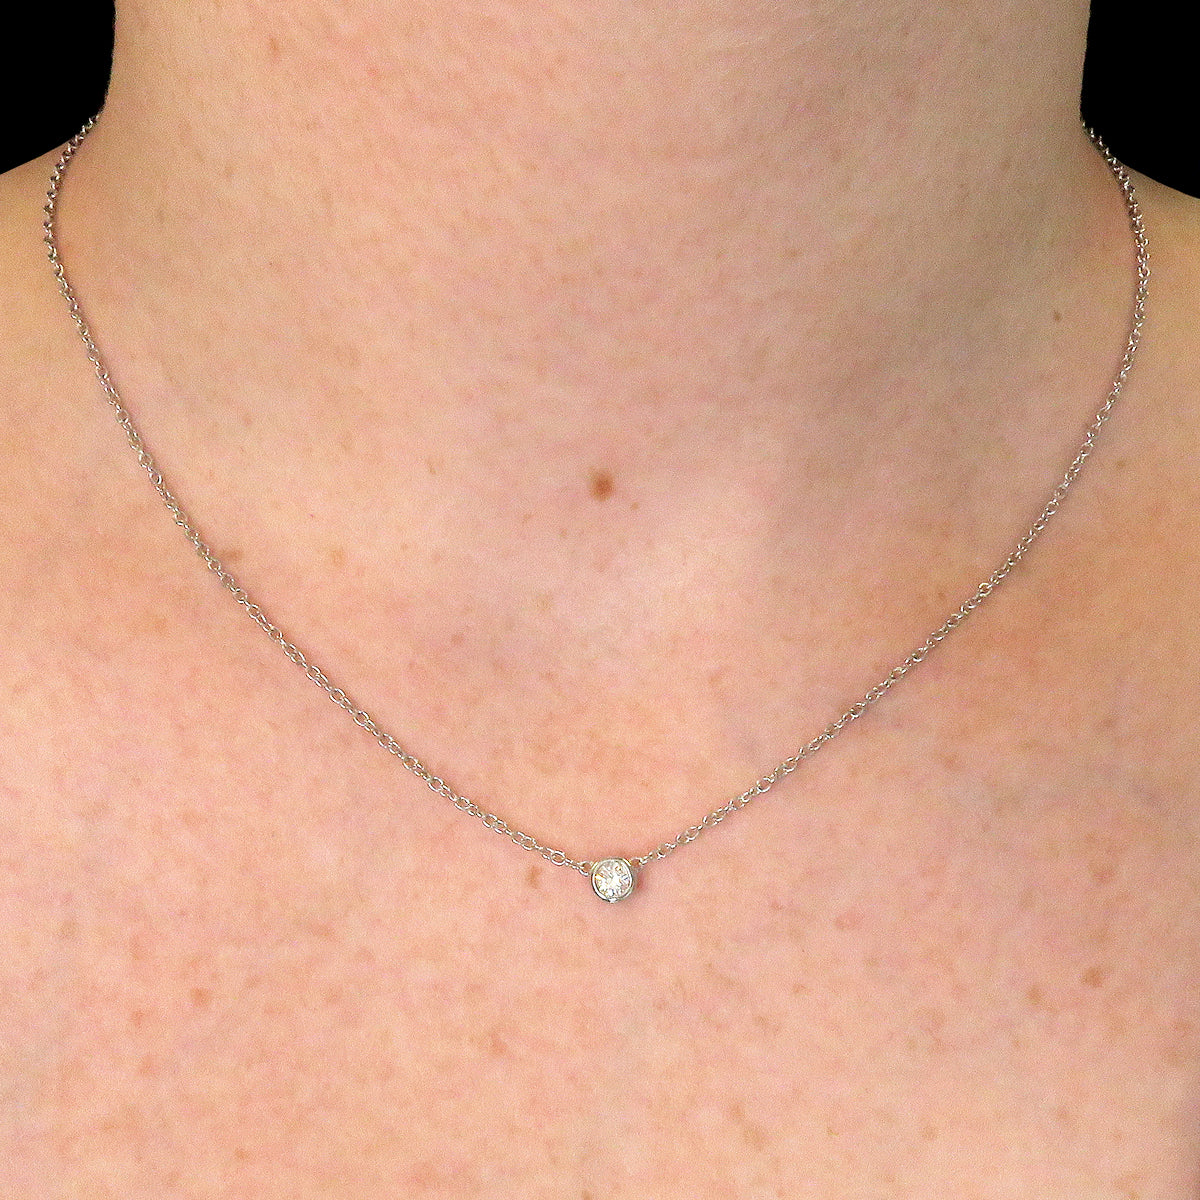 A girl wearing 0.20ct lab grown diamond necklace with 9k white gold